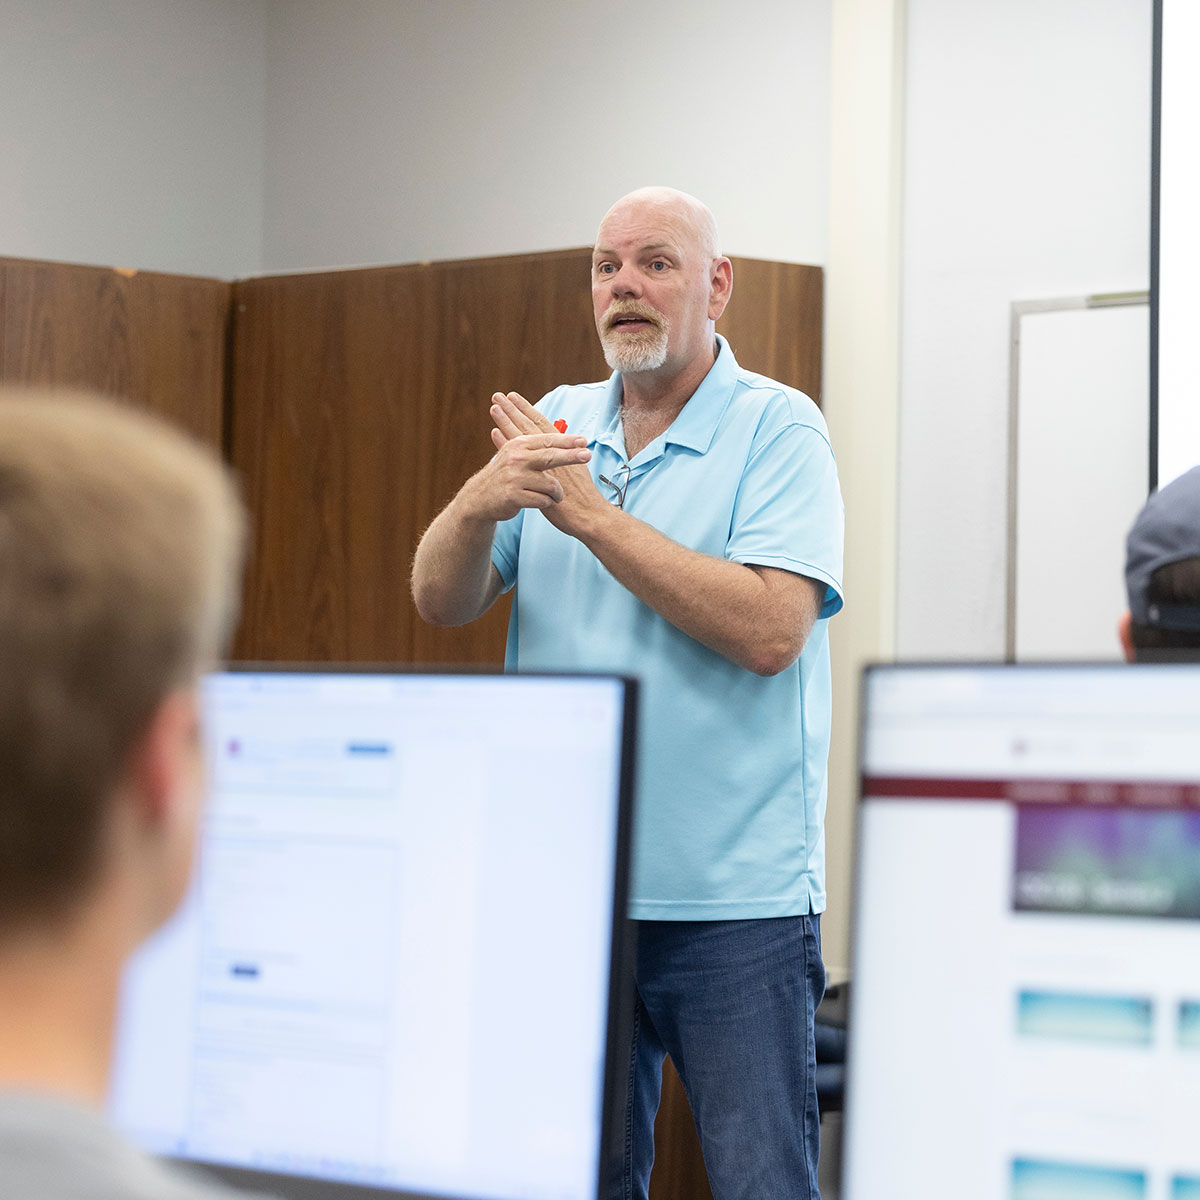 Keith Paschal, a computer science instructor at MSU, teaches students in his CSC 130: World of Computer Science class.